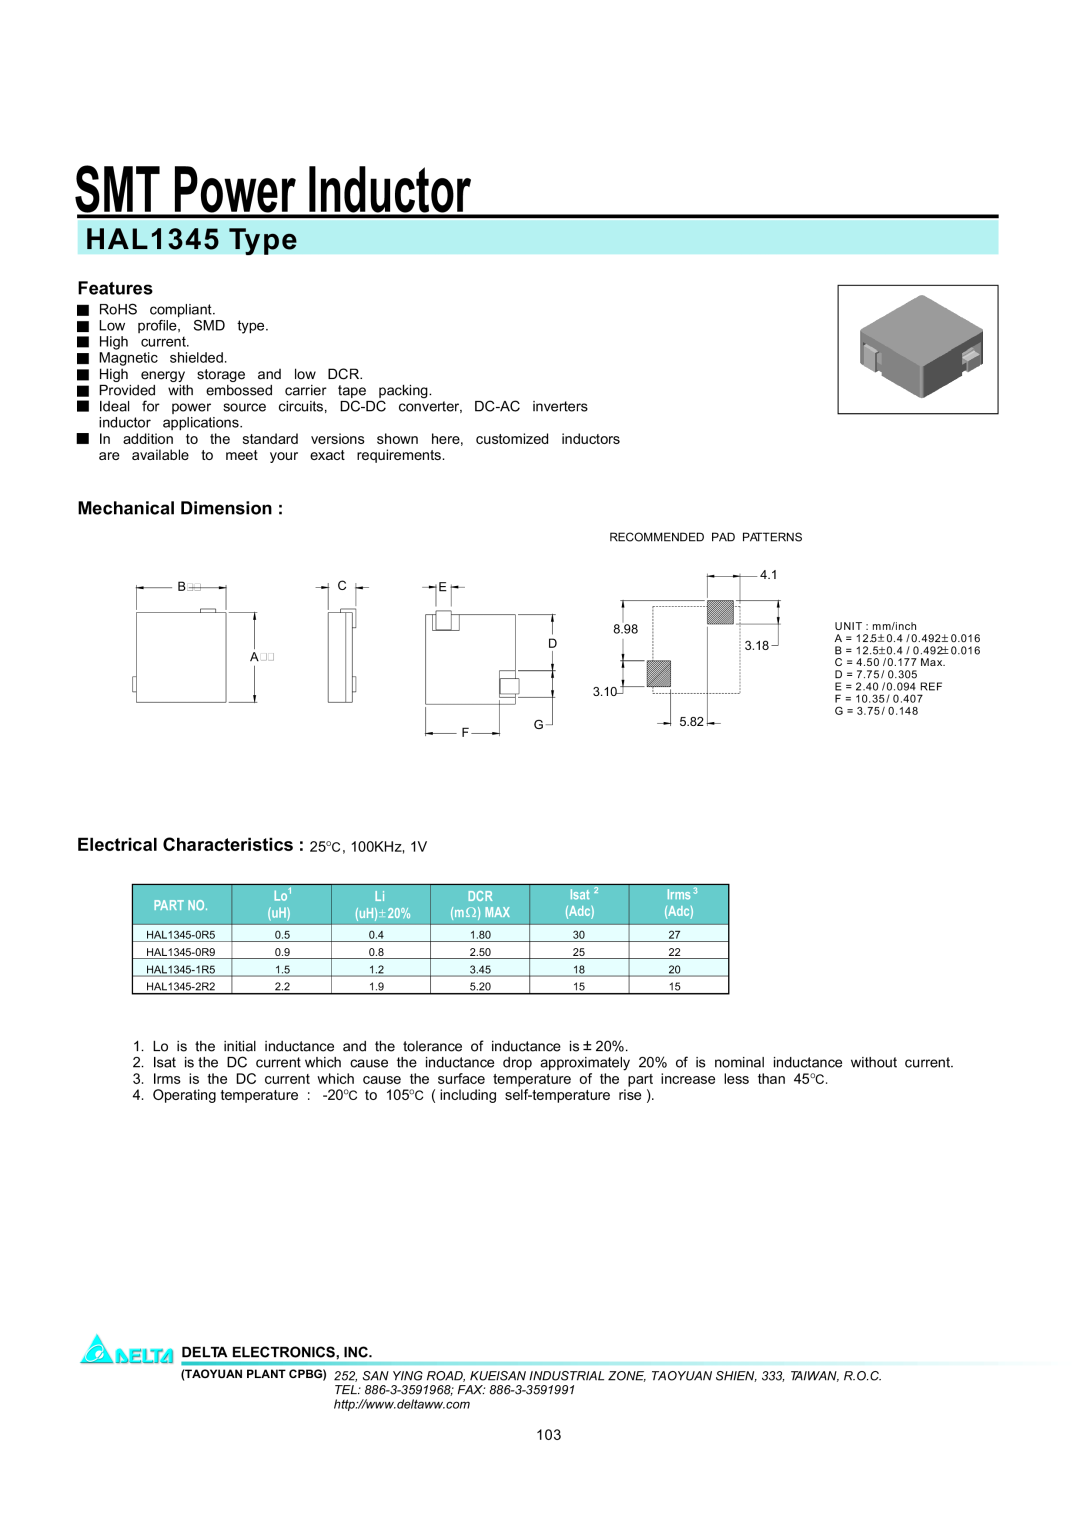 Delta Electronics manual SMT Power Inductor, HAL1345 Type, Features, Mechanical Dimension, Isat, Irms, uH 20% 